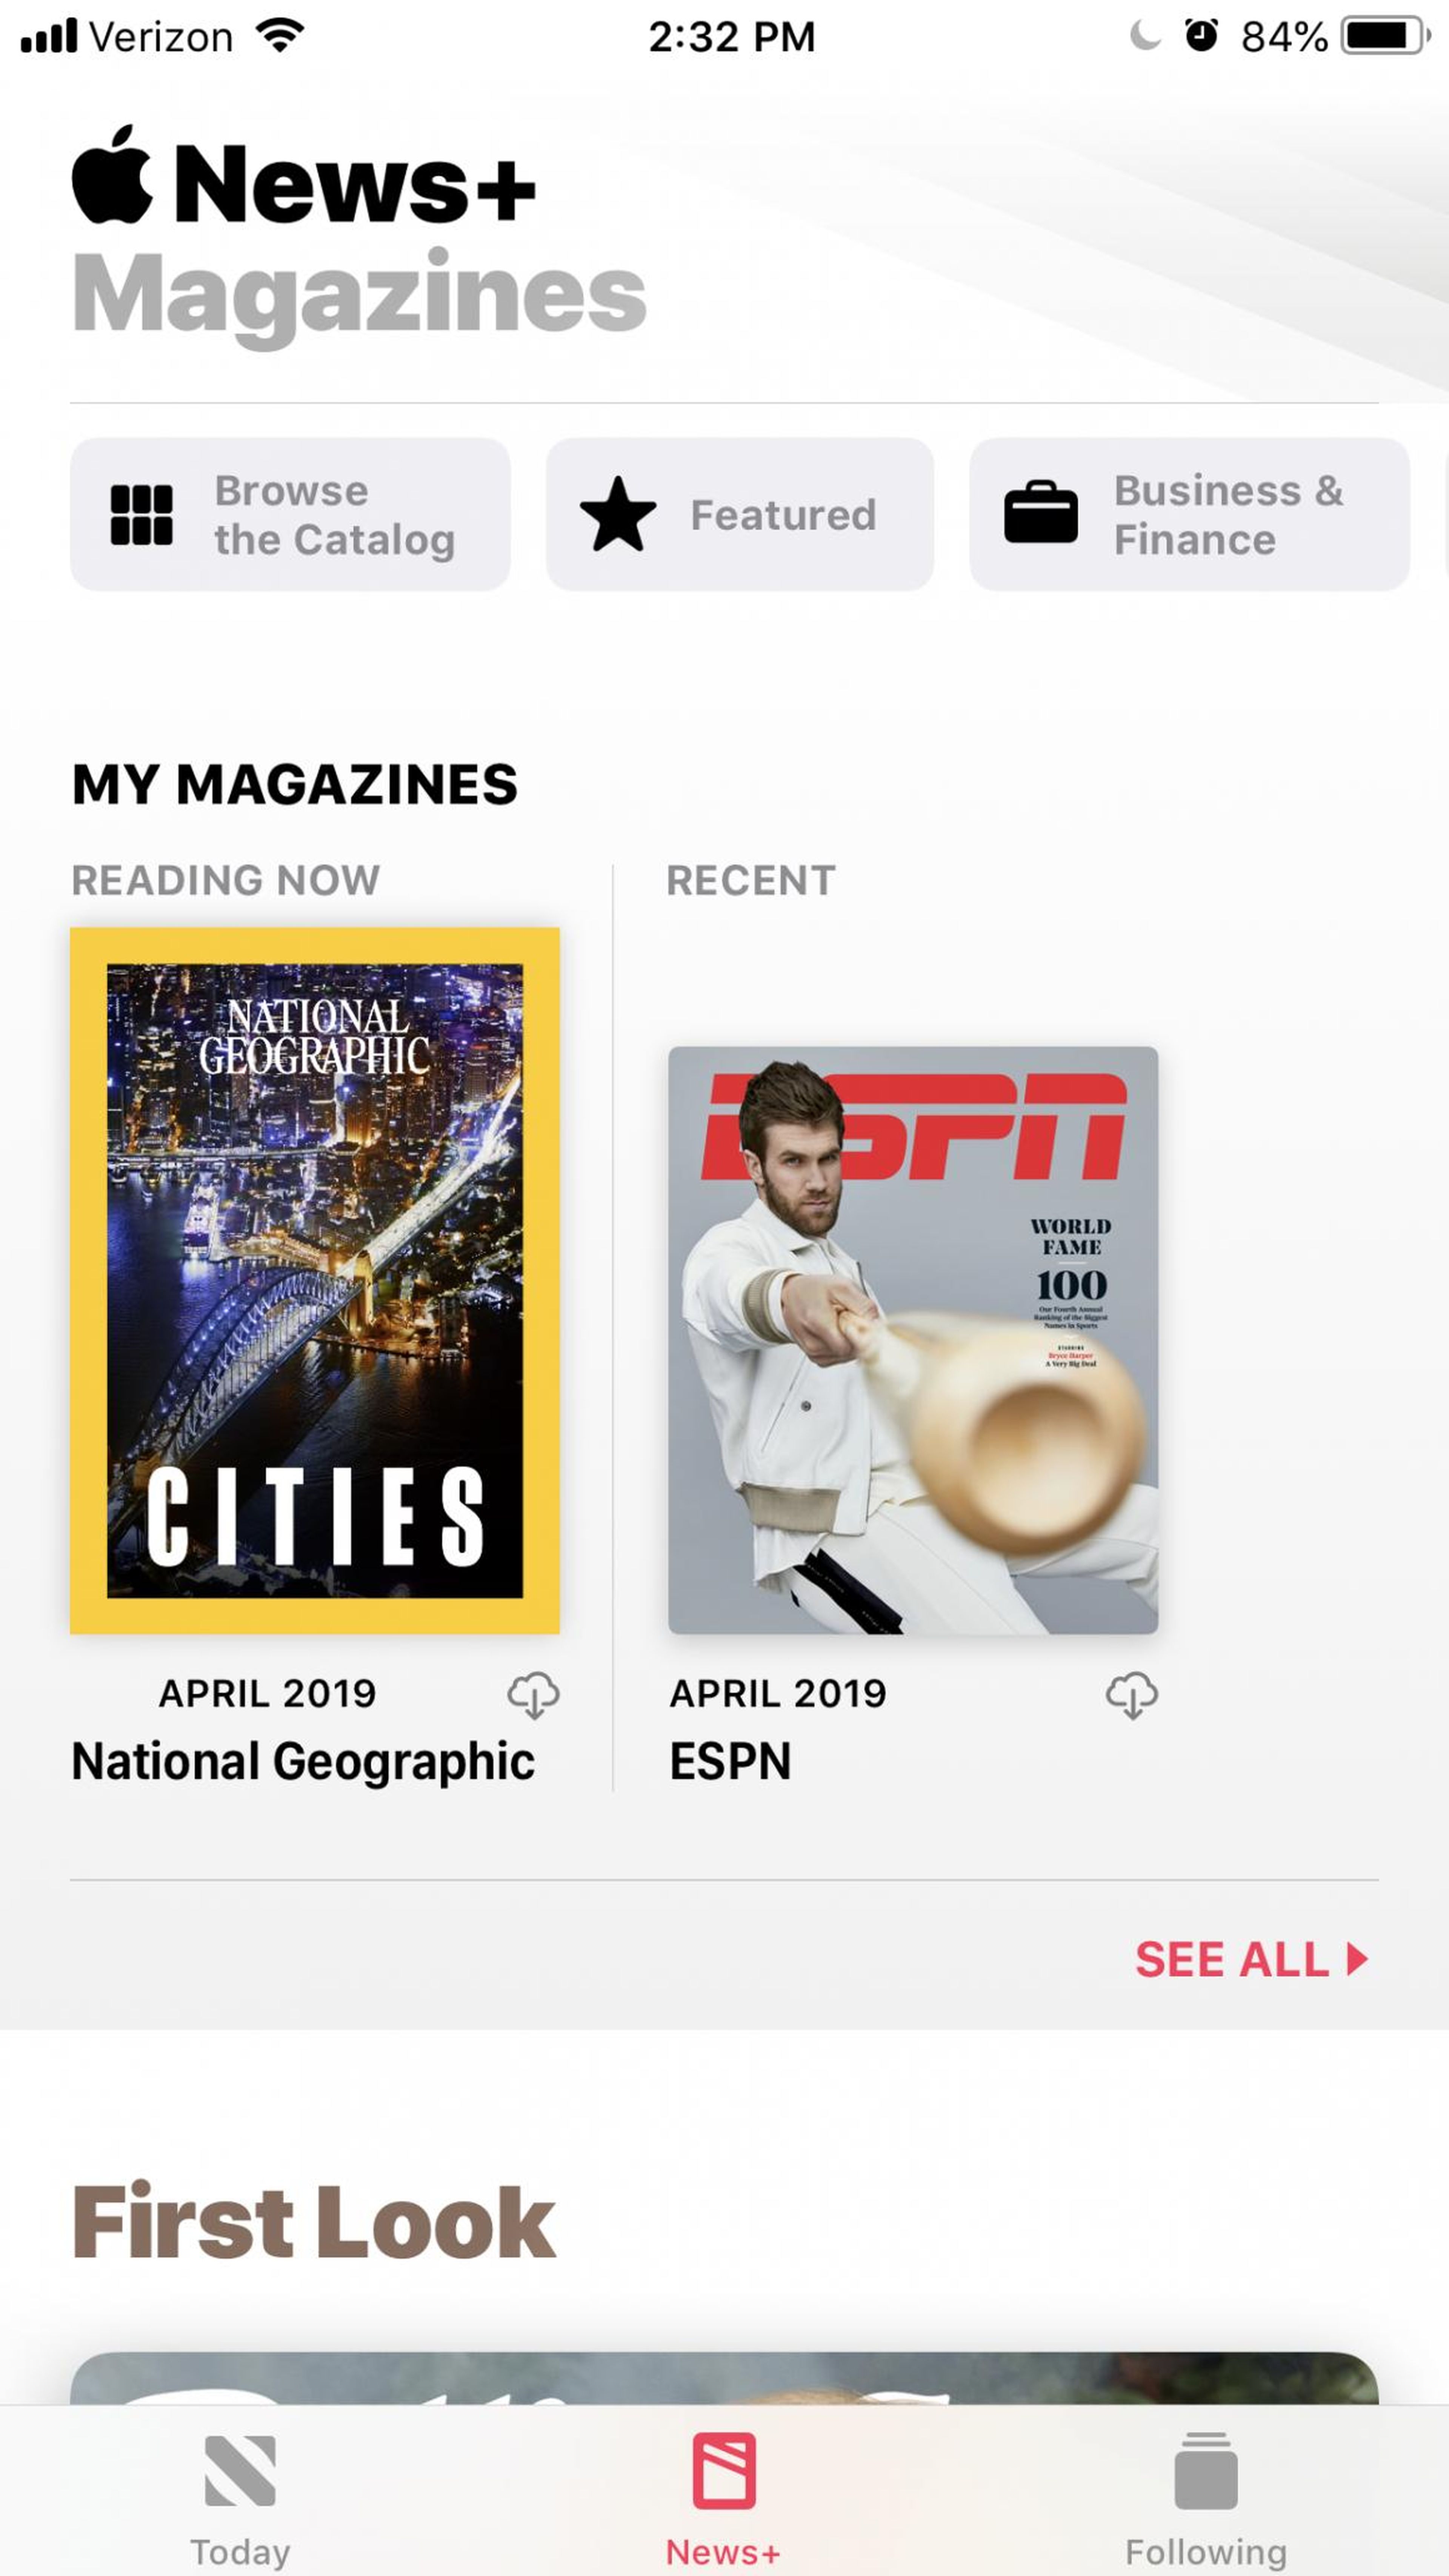 The "My Magazines" section of the app highlights the issue you were reading most recently.